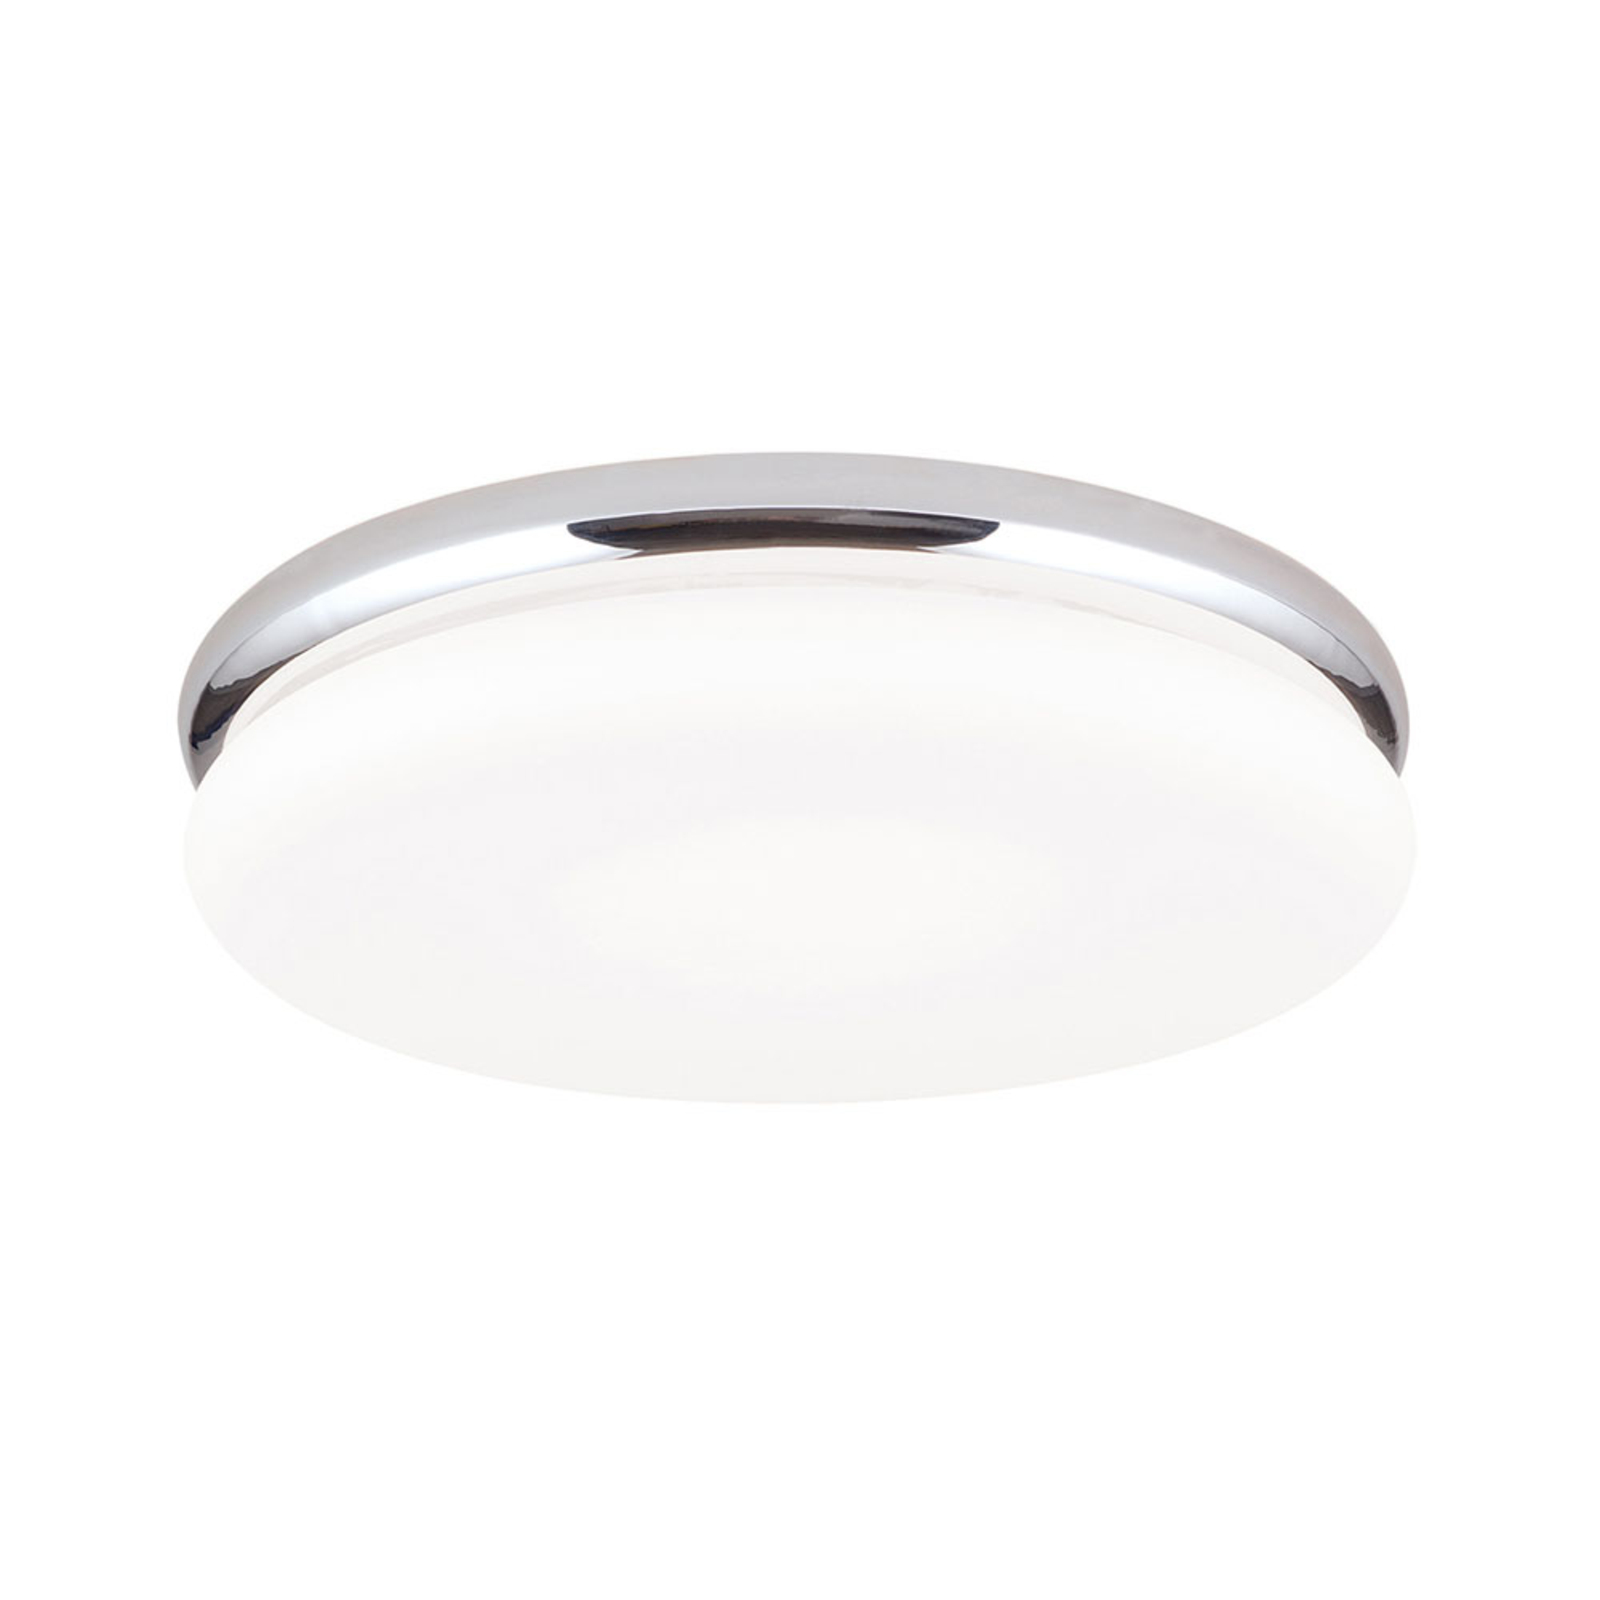 James LED ceiling light with metal housing, chrome